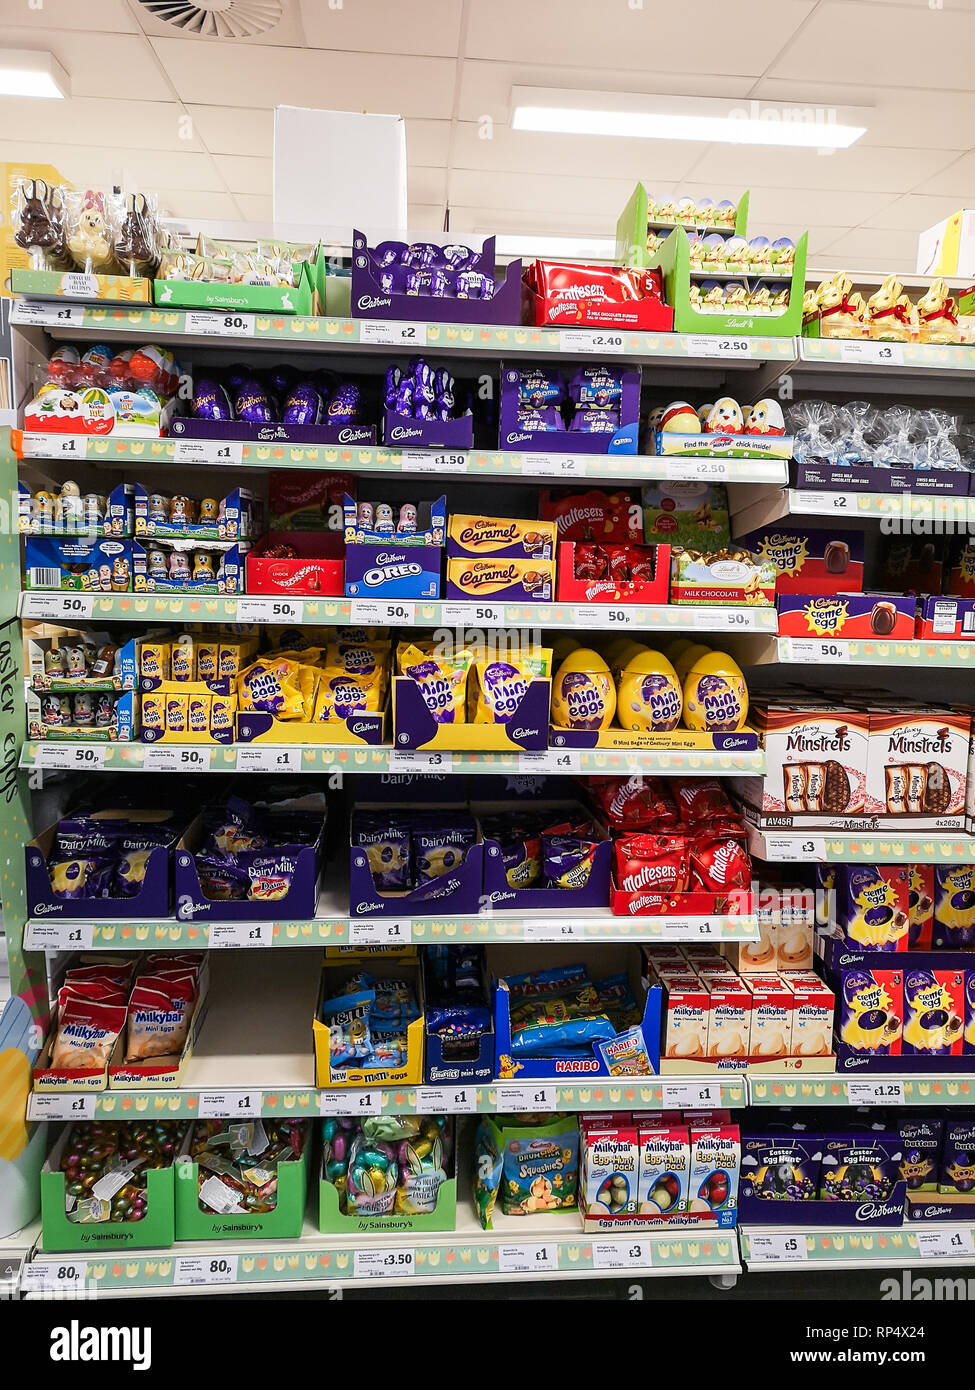 Manchester, UK - Feb 18th, 2019: Selection of different chocolate easter eggs on shelves in a shop store before the Easter holidays. Stock Photo